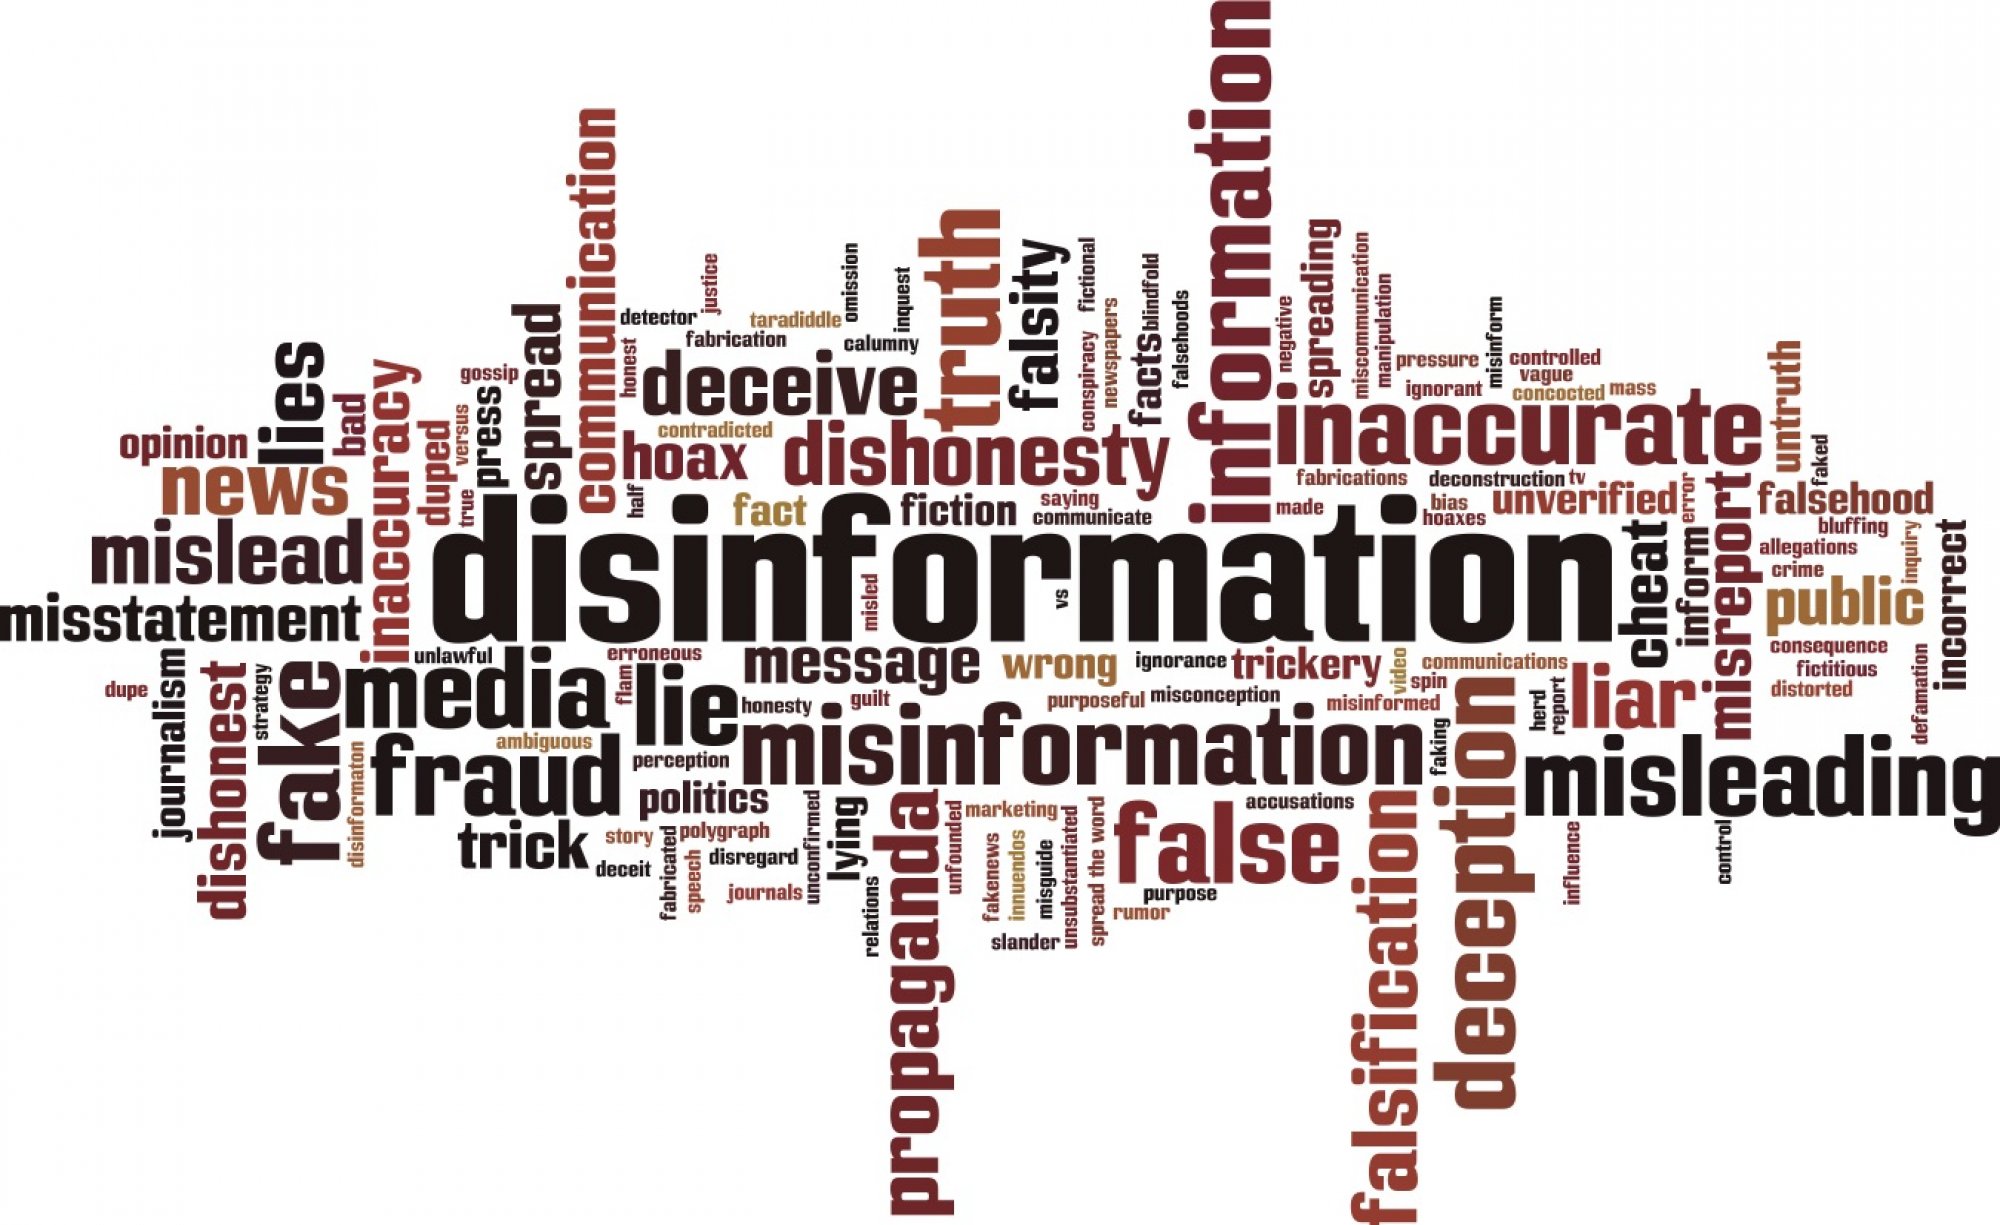 SHRM Journal Special Issue: Disinformation in the OSCE Context